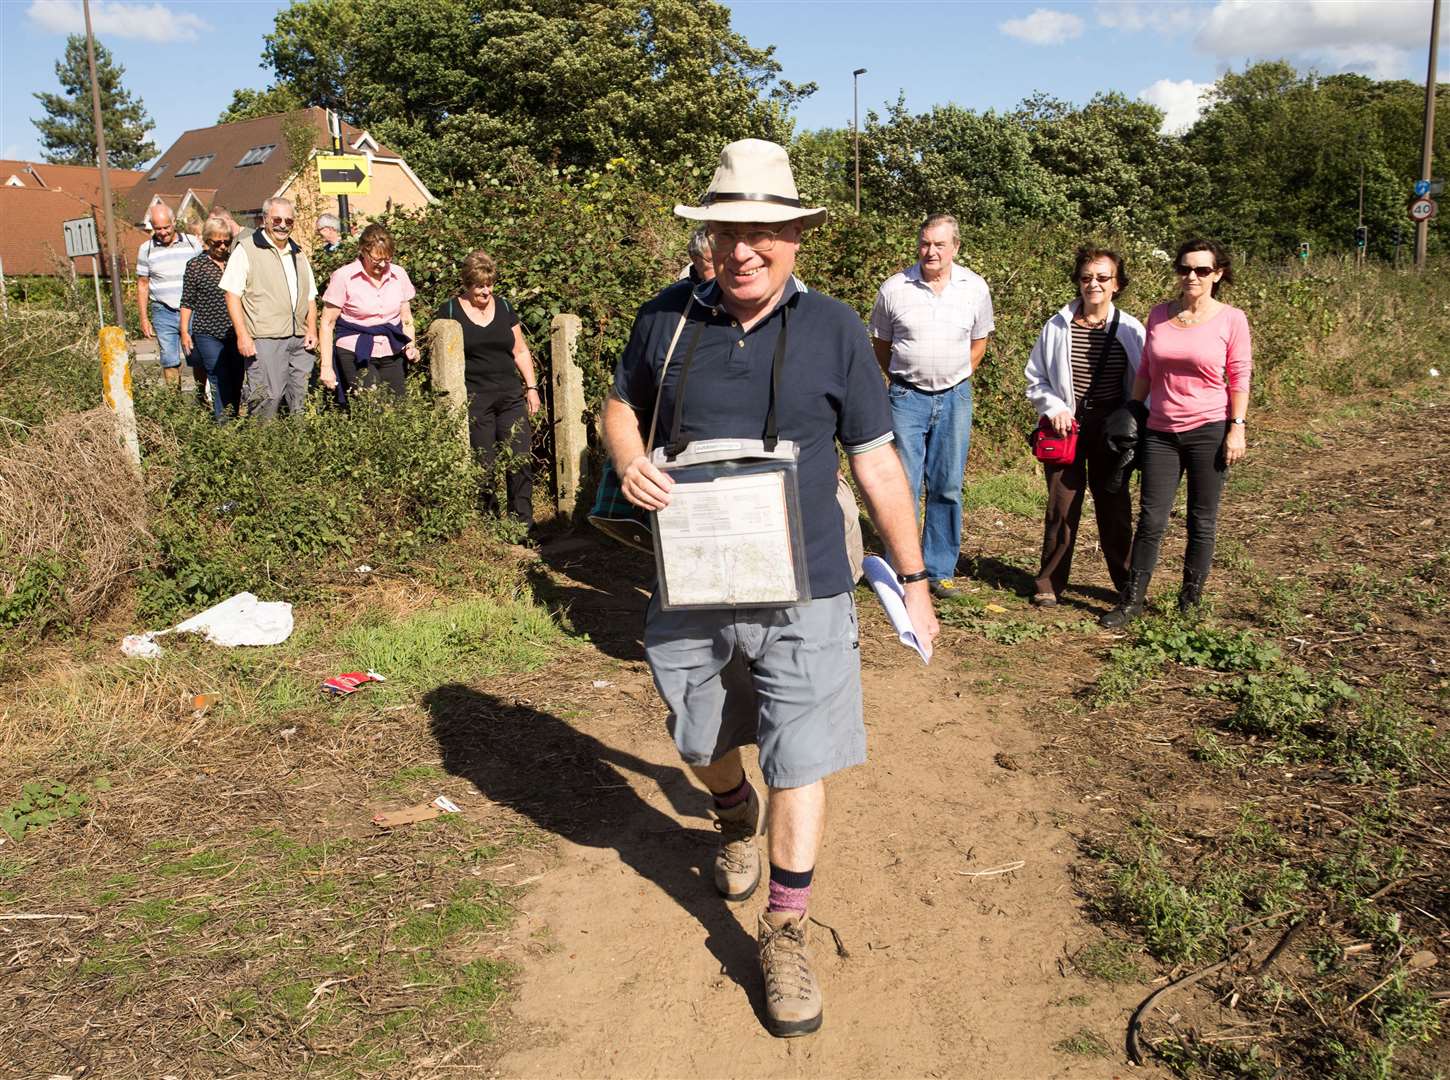 Parish Council Chairman David Thornewell leading a protest walk through the green fields at Broadwater Farm